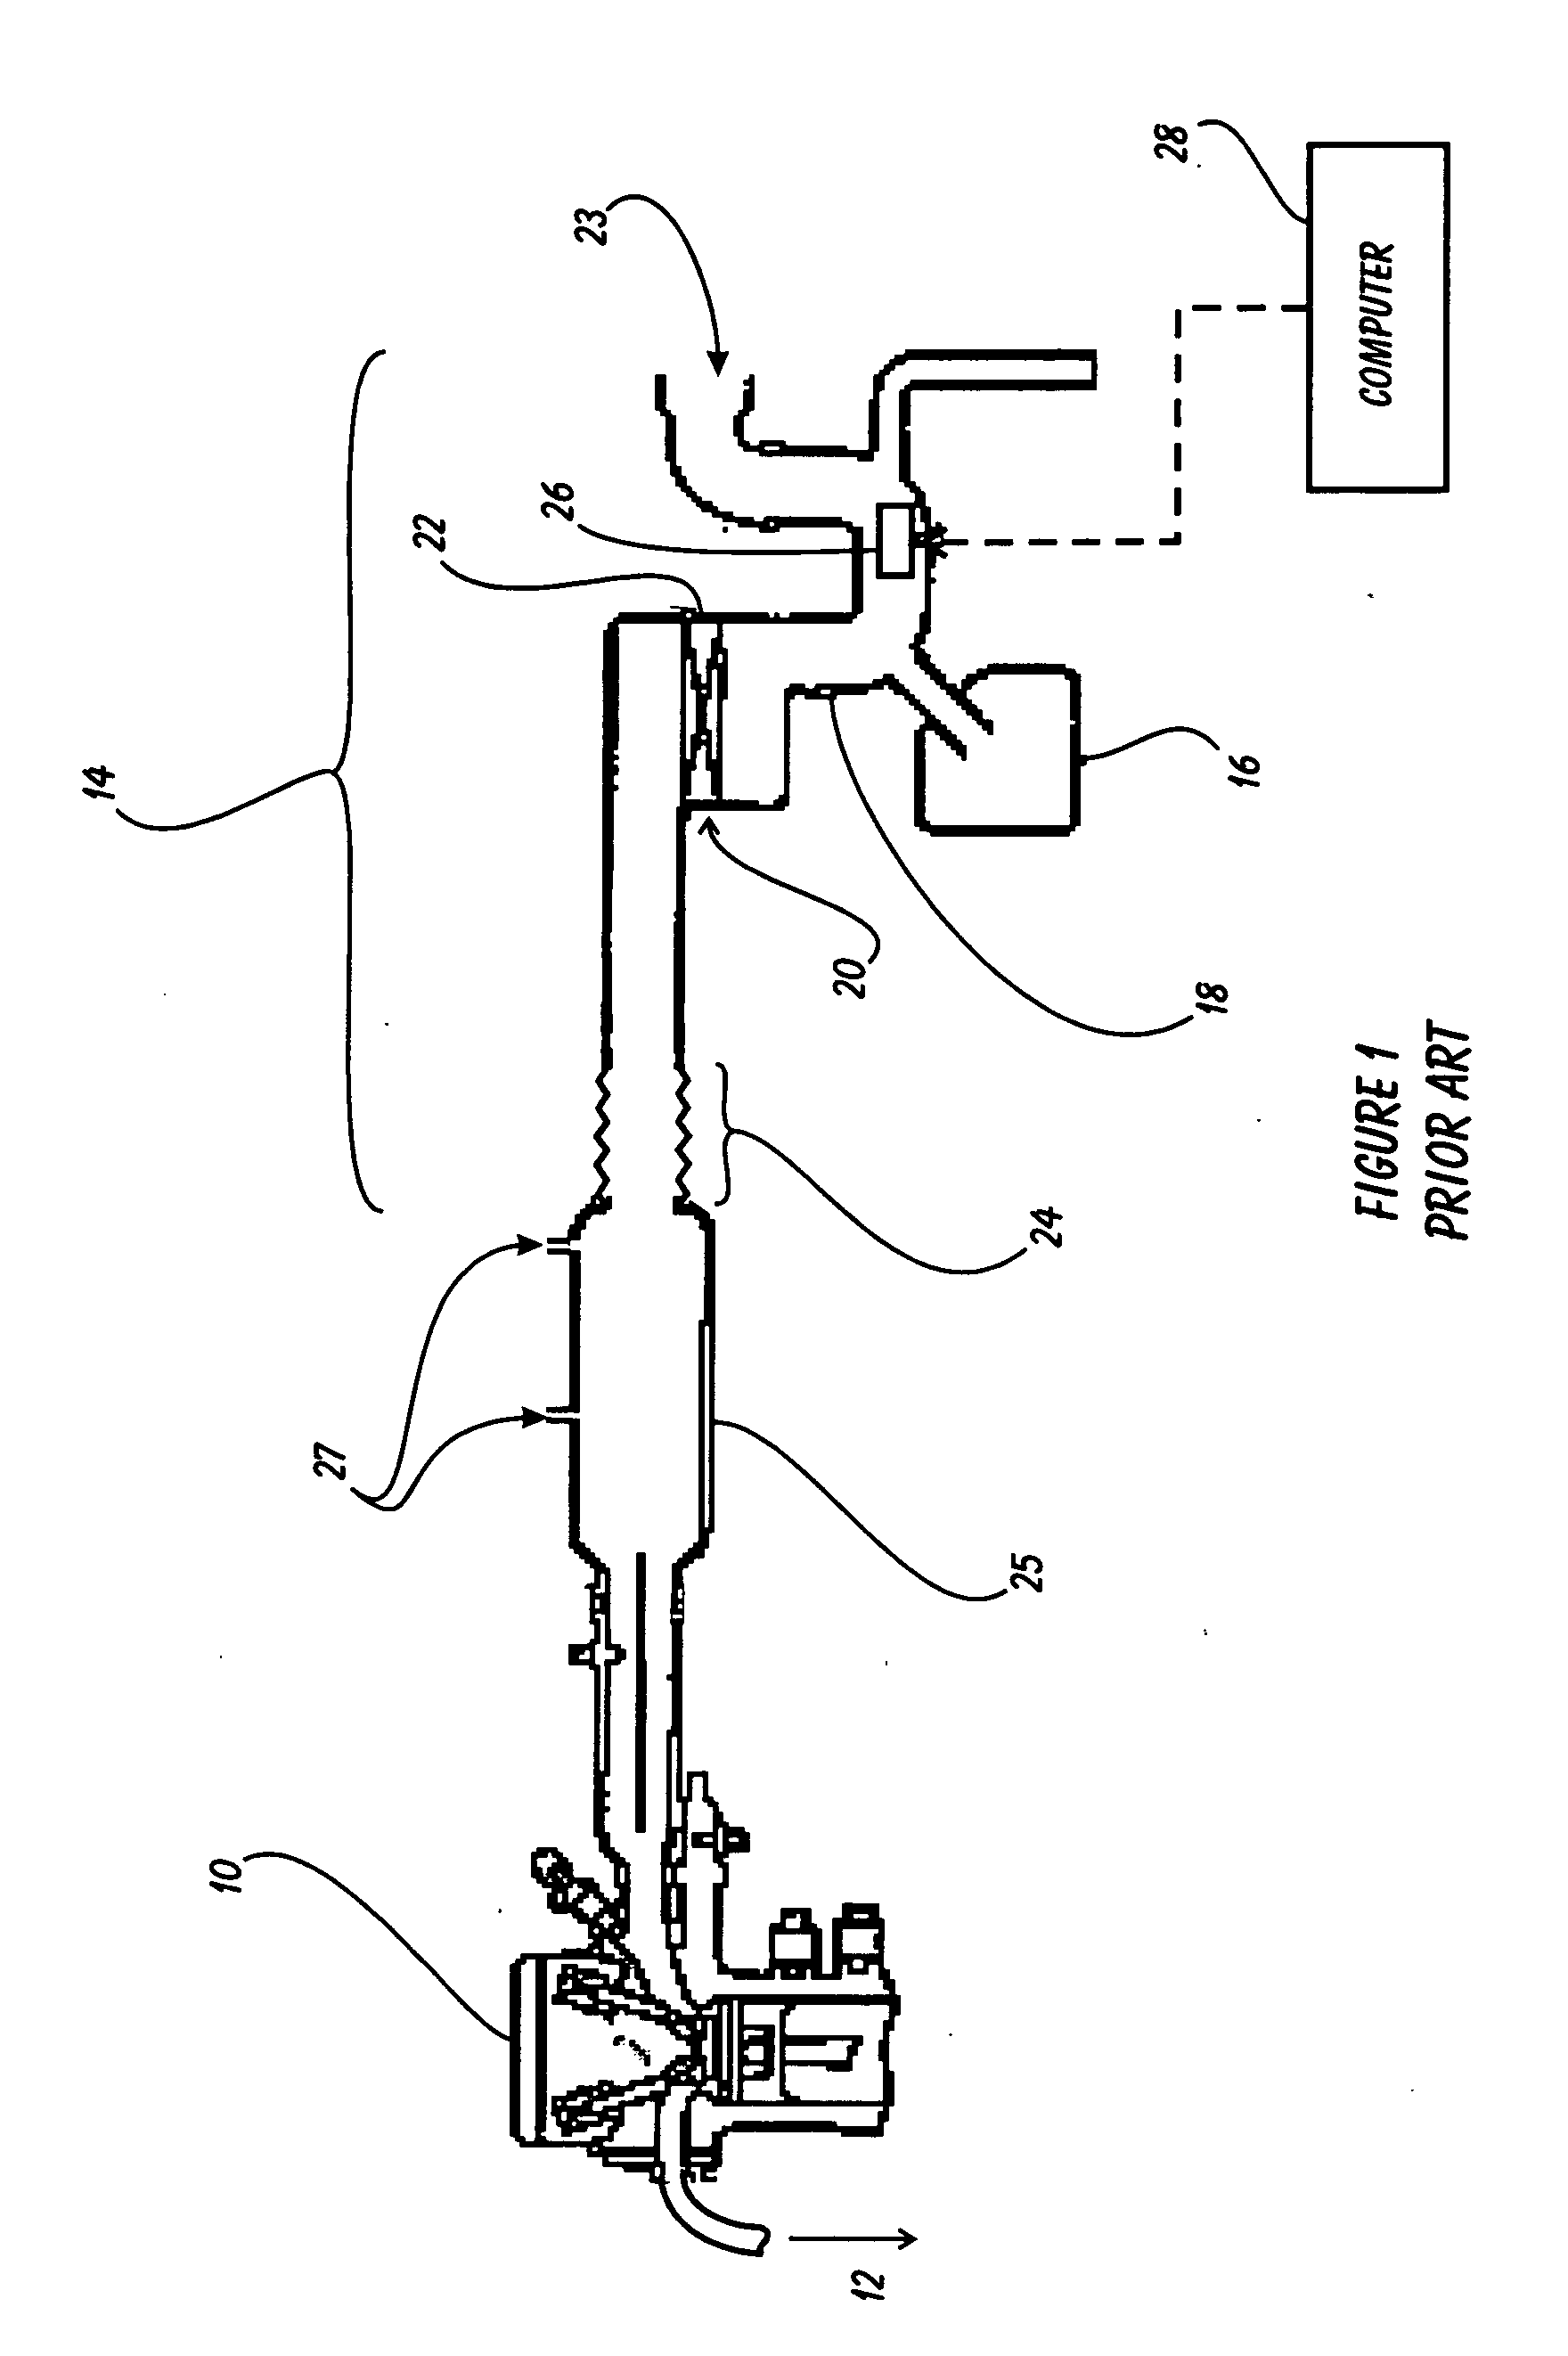 Calibration method for air intake tracts for internal combustion engines